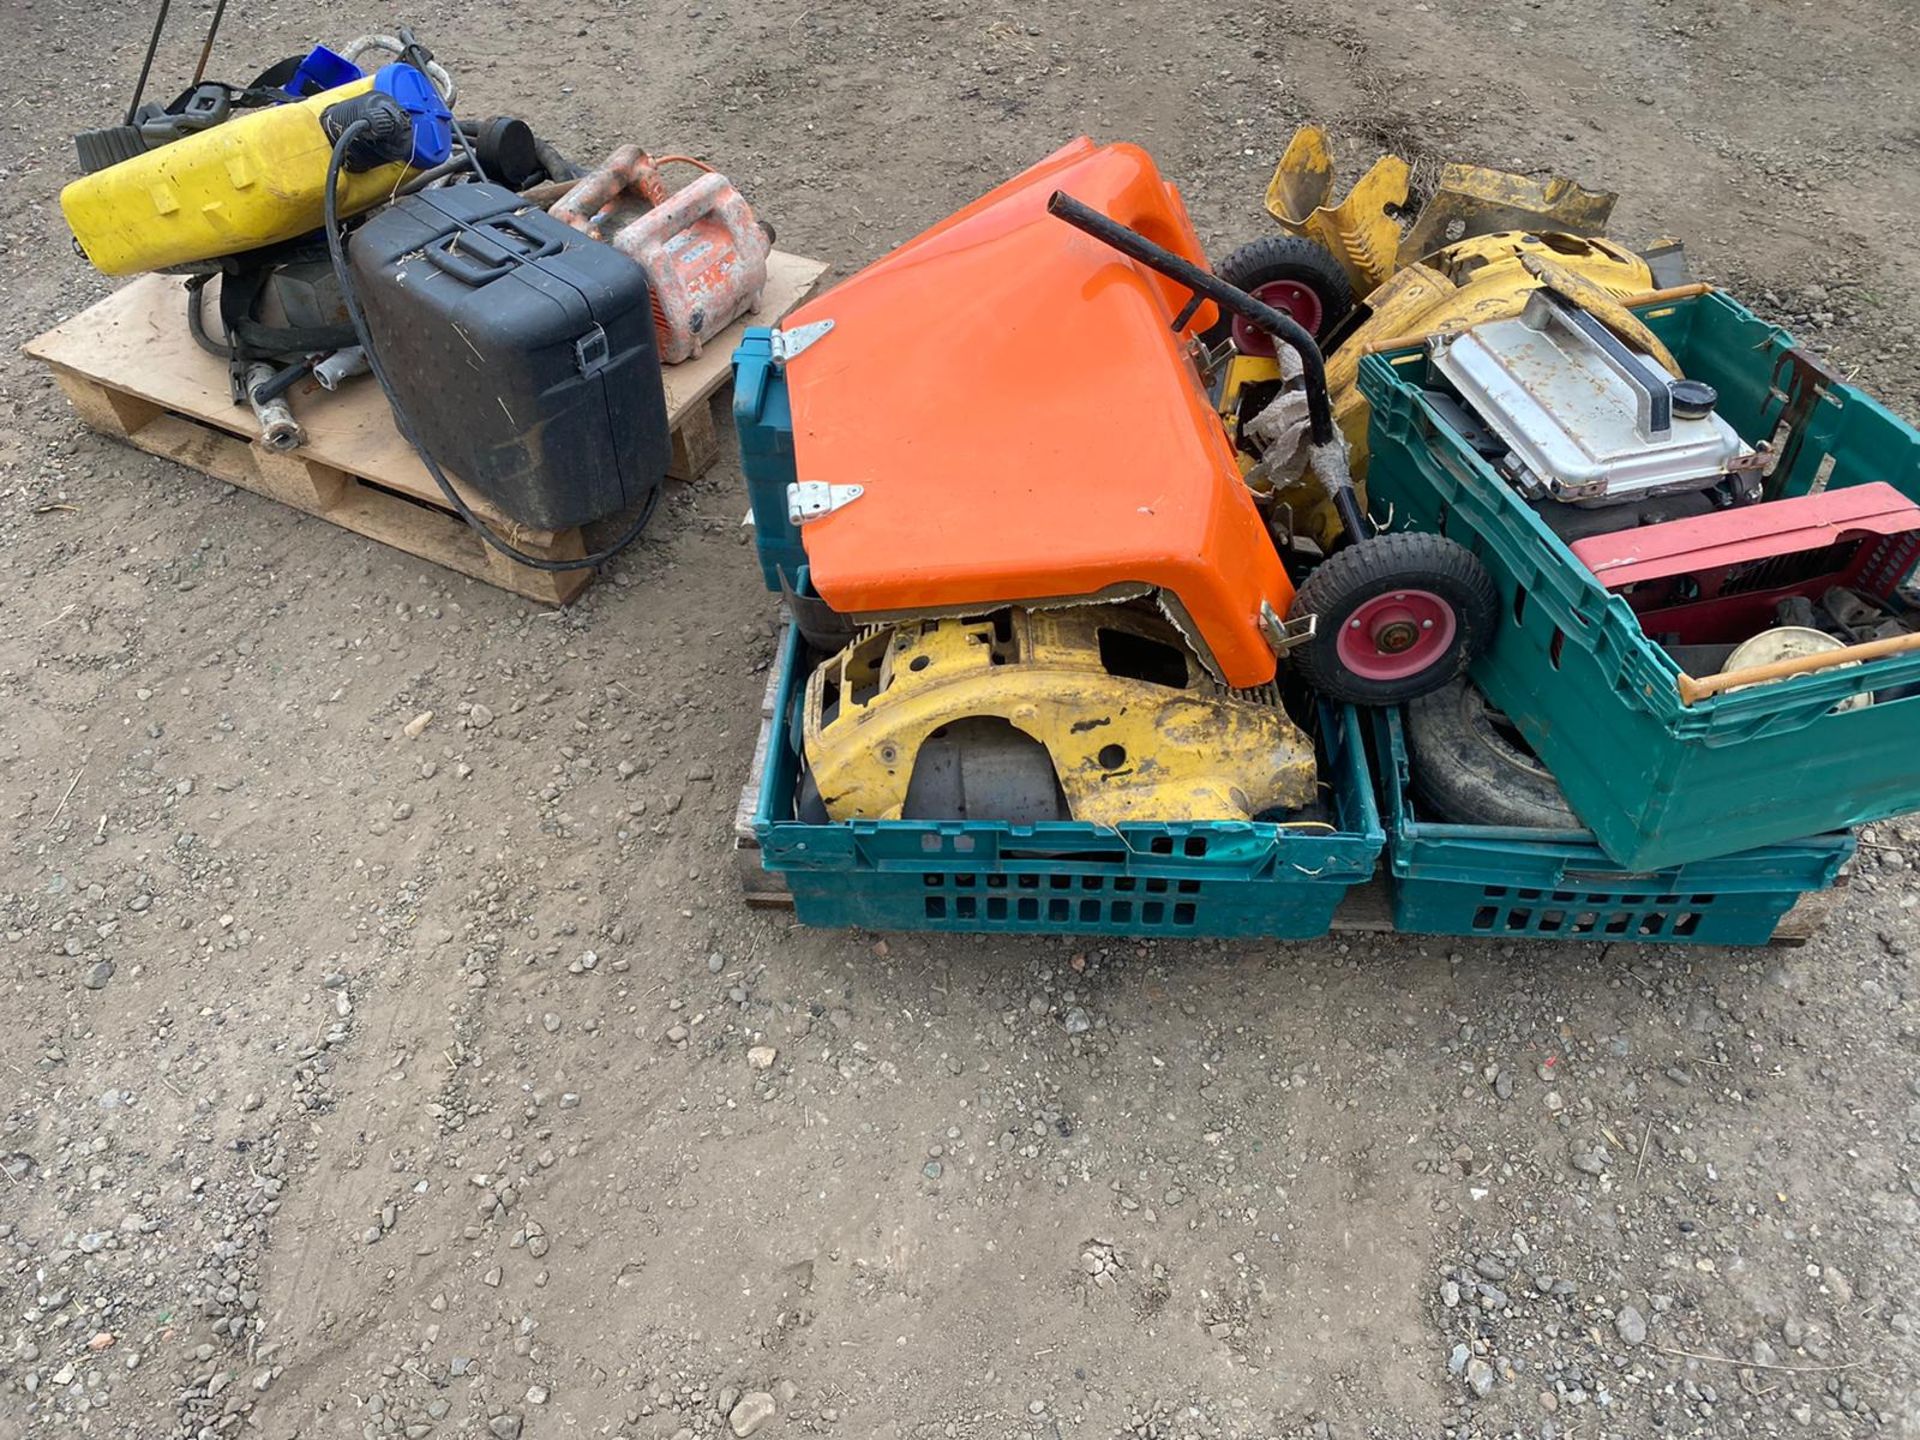 JOB LOT OF POWER TOOLS & MACHINERY SPARES. LOCATION: NORTH YORKSHIRE - Image 3 of 4